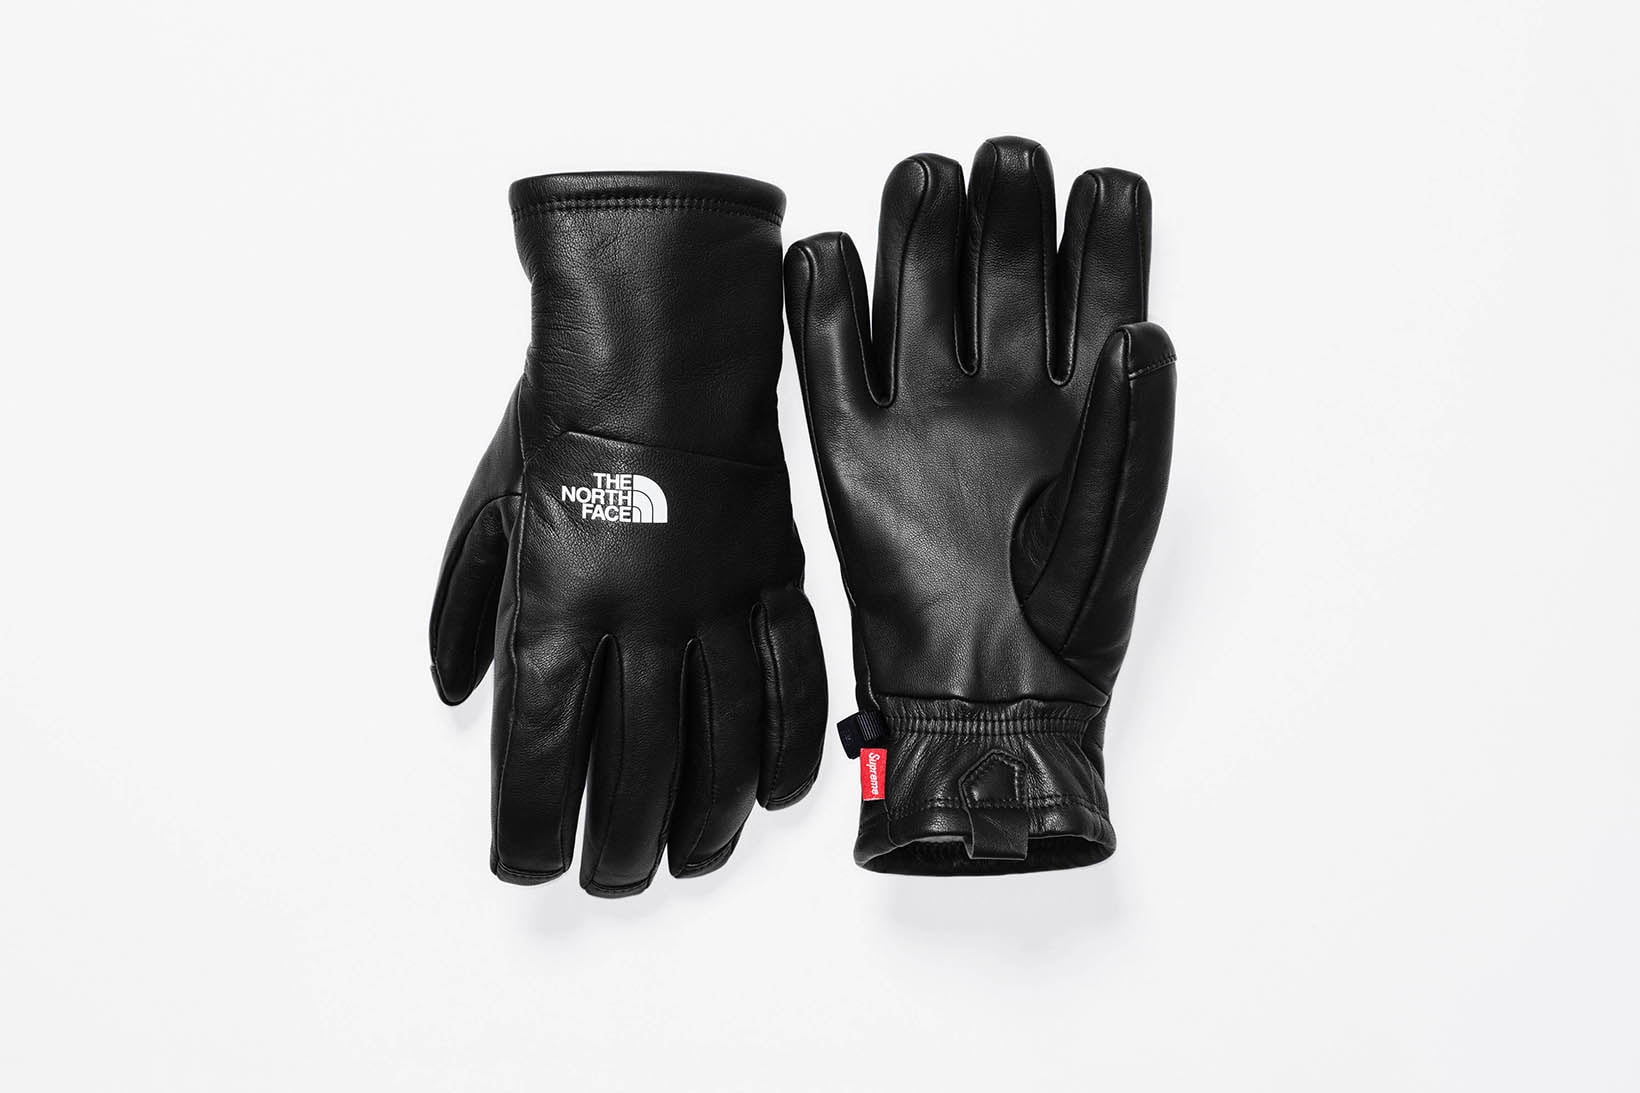 Supreme x The North Face 2017 Fall Black Gloves